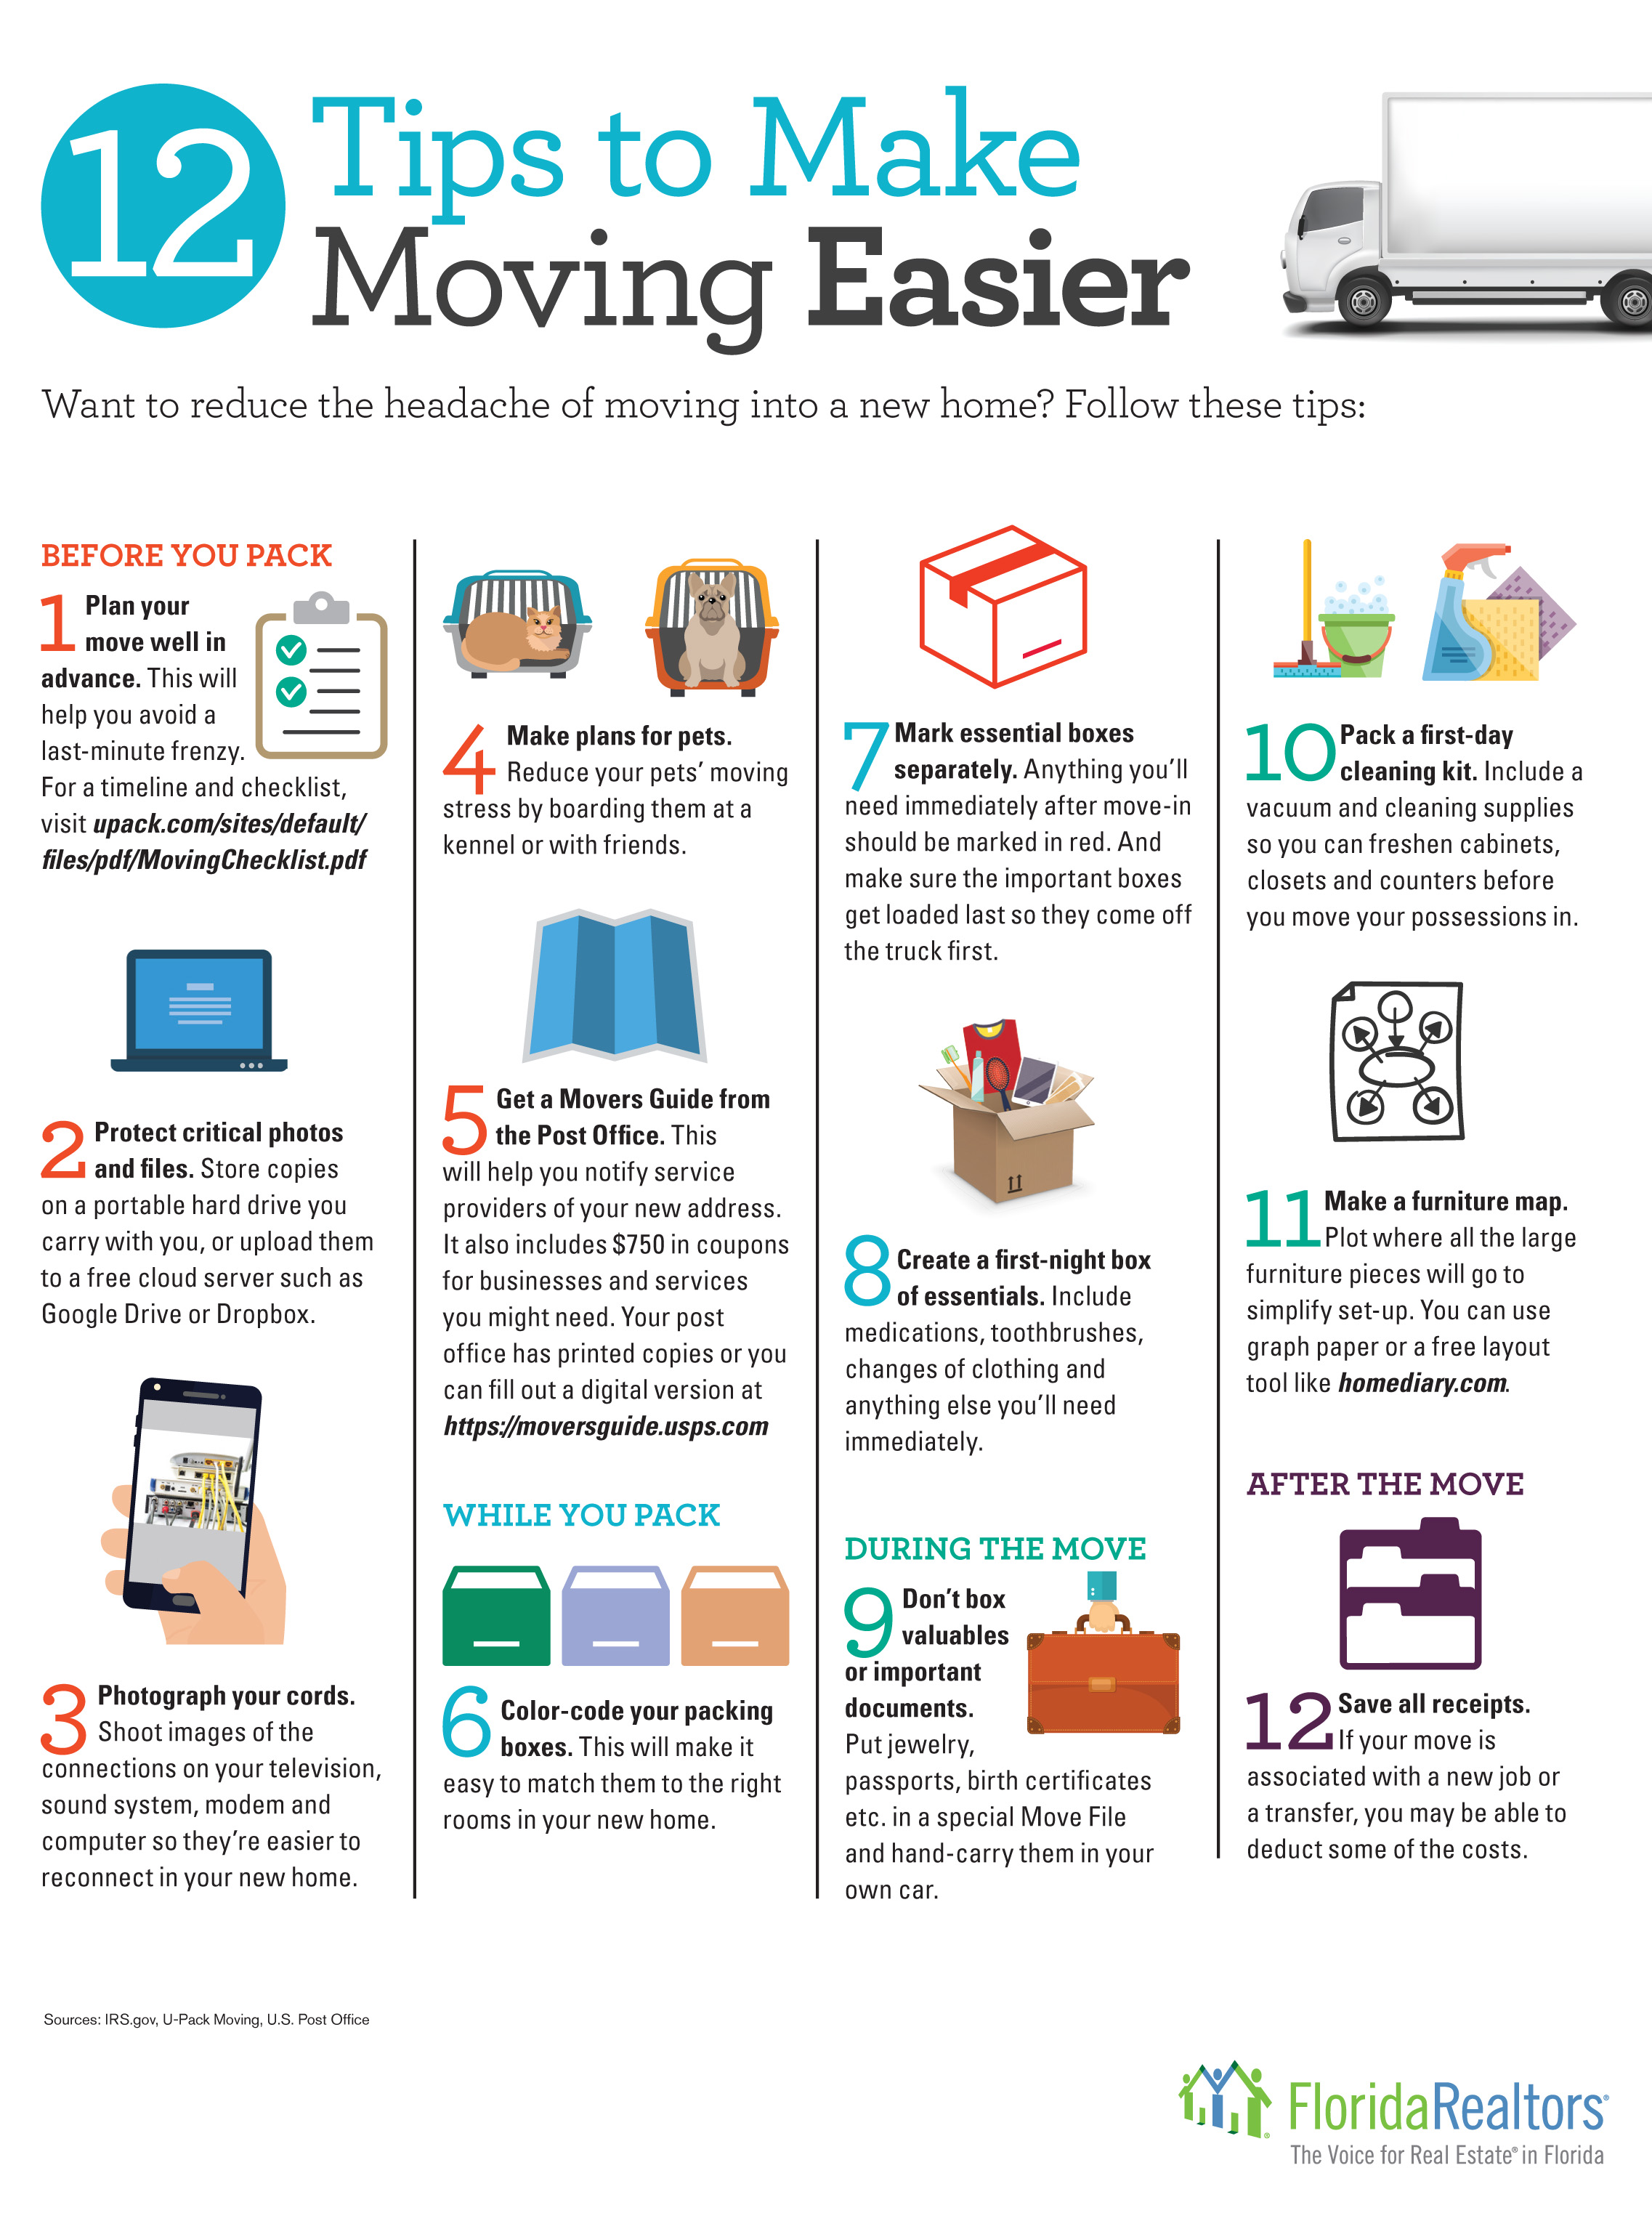 Moving Tips to make moving easier